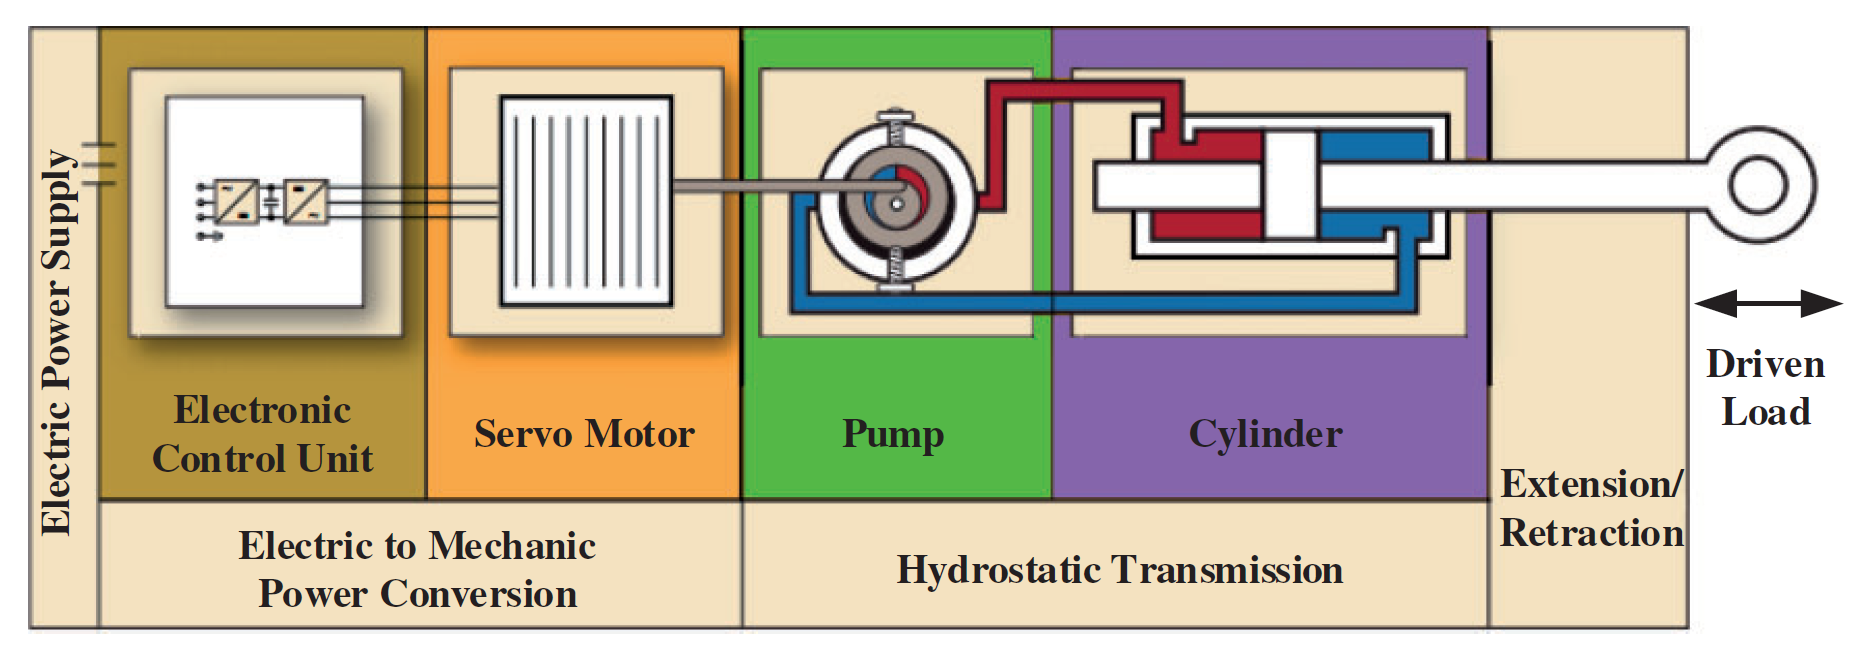 Diagram illustrating the main components involved in converting electric power to actuator movement in an electrohydrostatic actuator. Source: Qiao et al. A review of electromechanical actuators for More/All Electric aircraft systems. (Click image to enlarge)